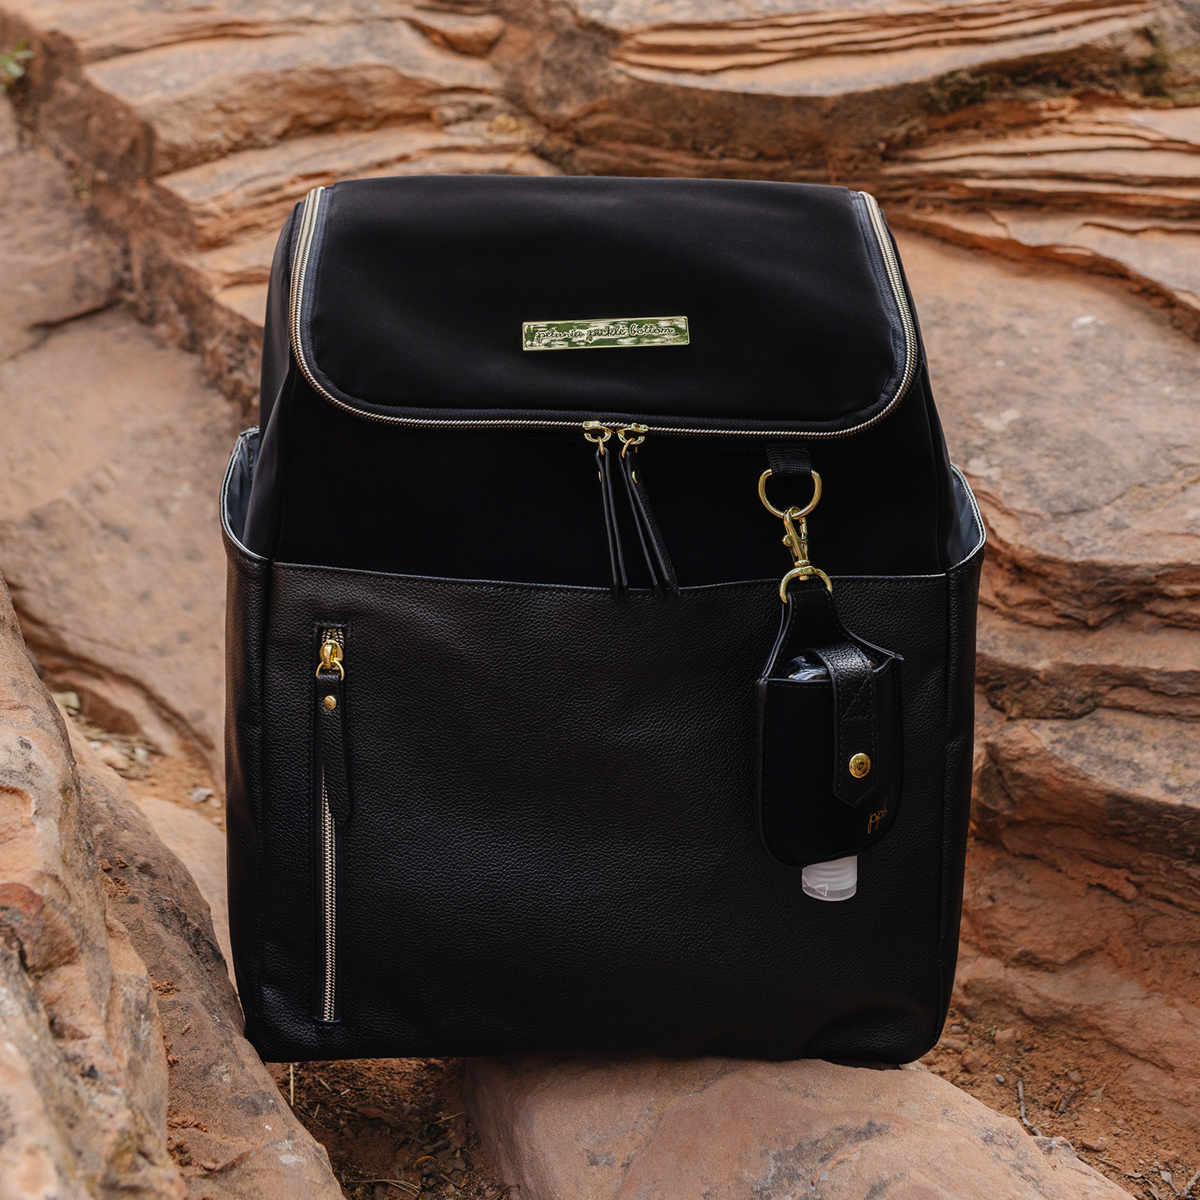 tempo backpack in twilight black